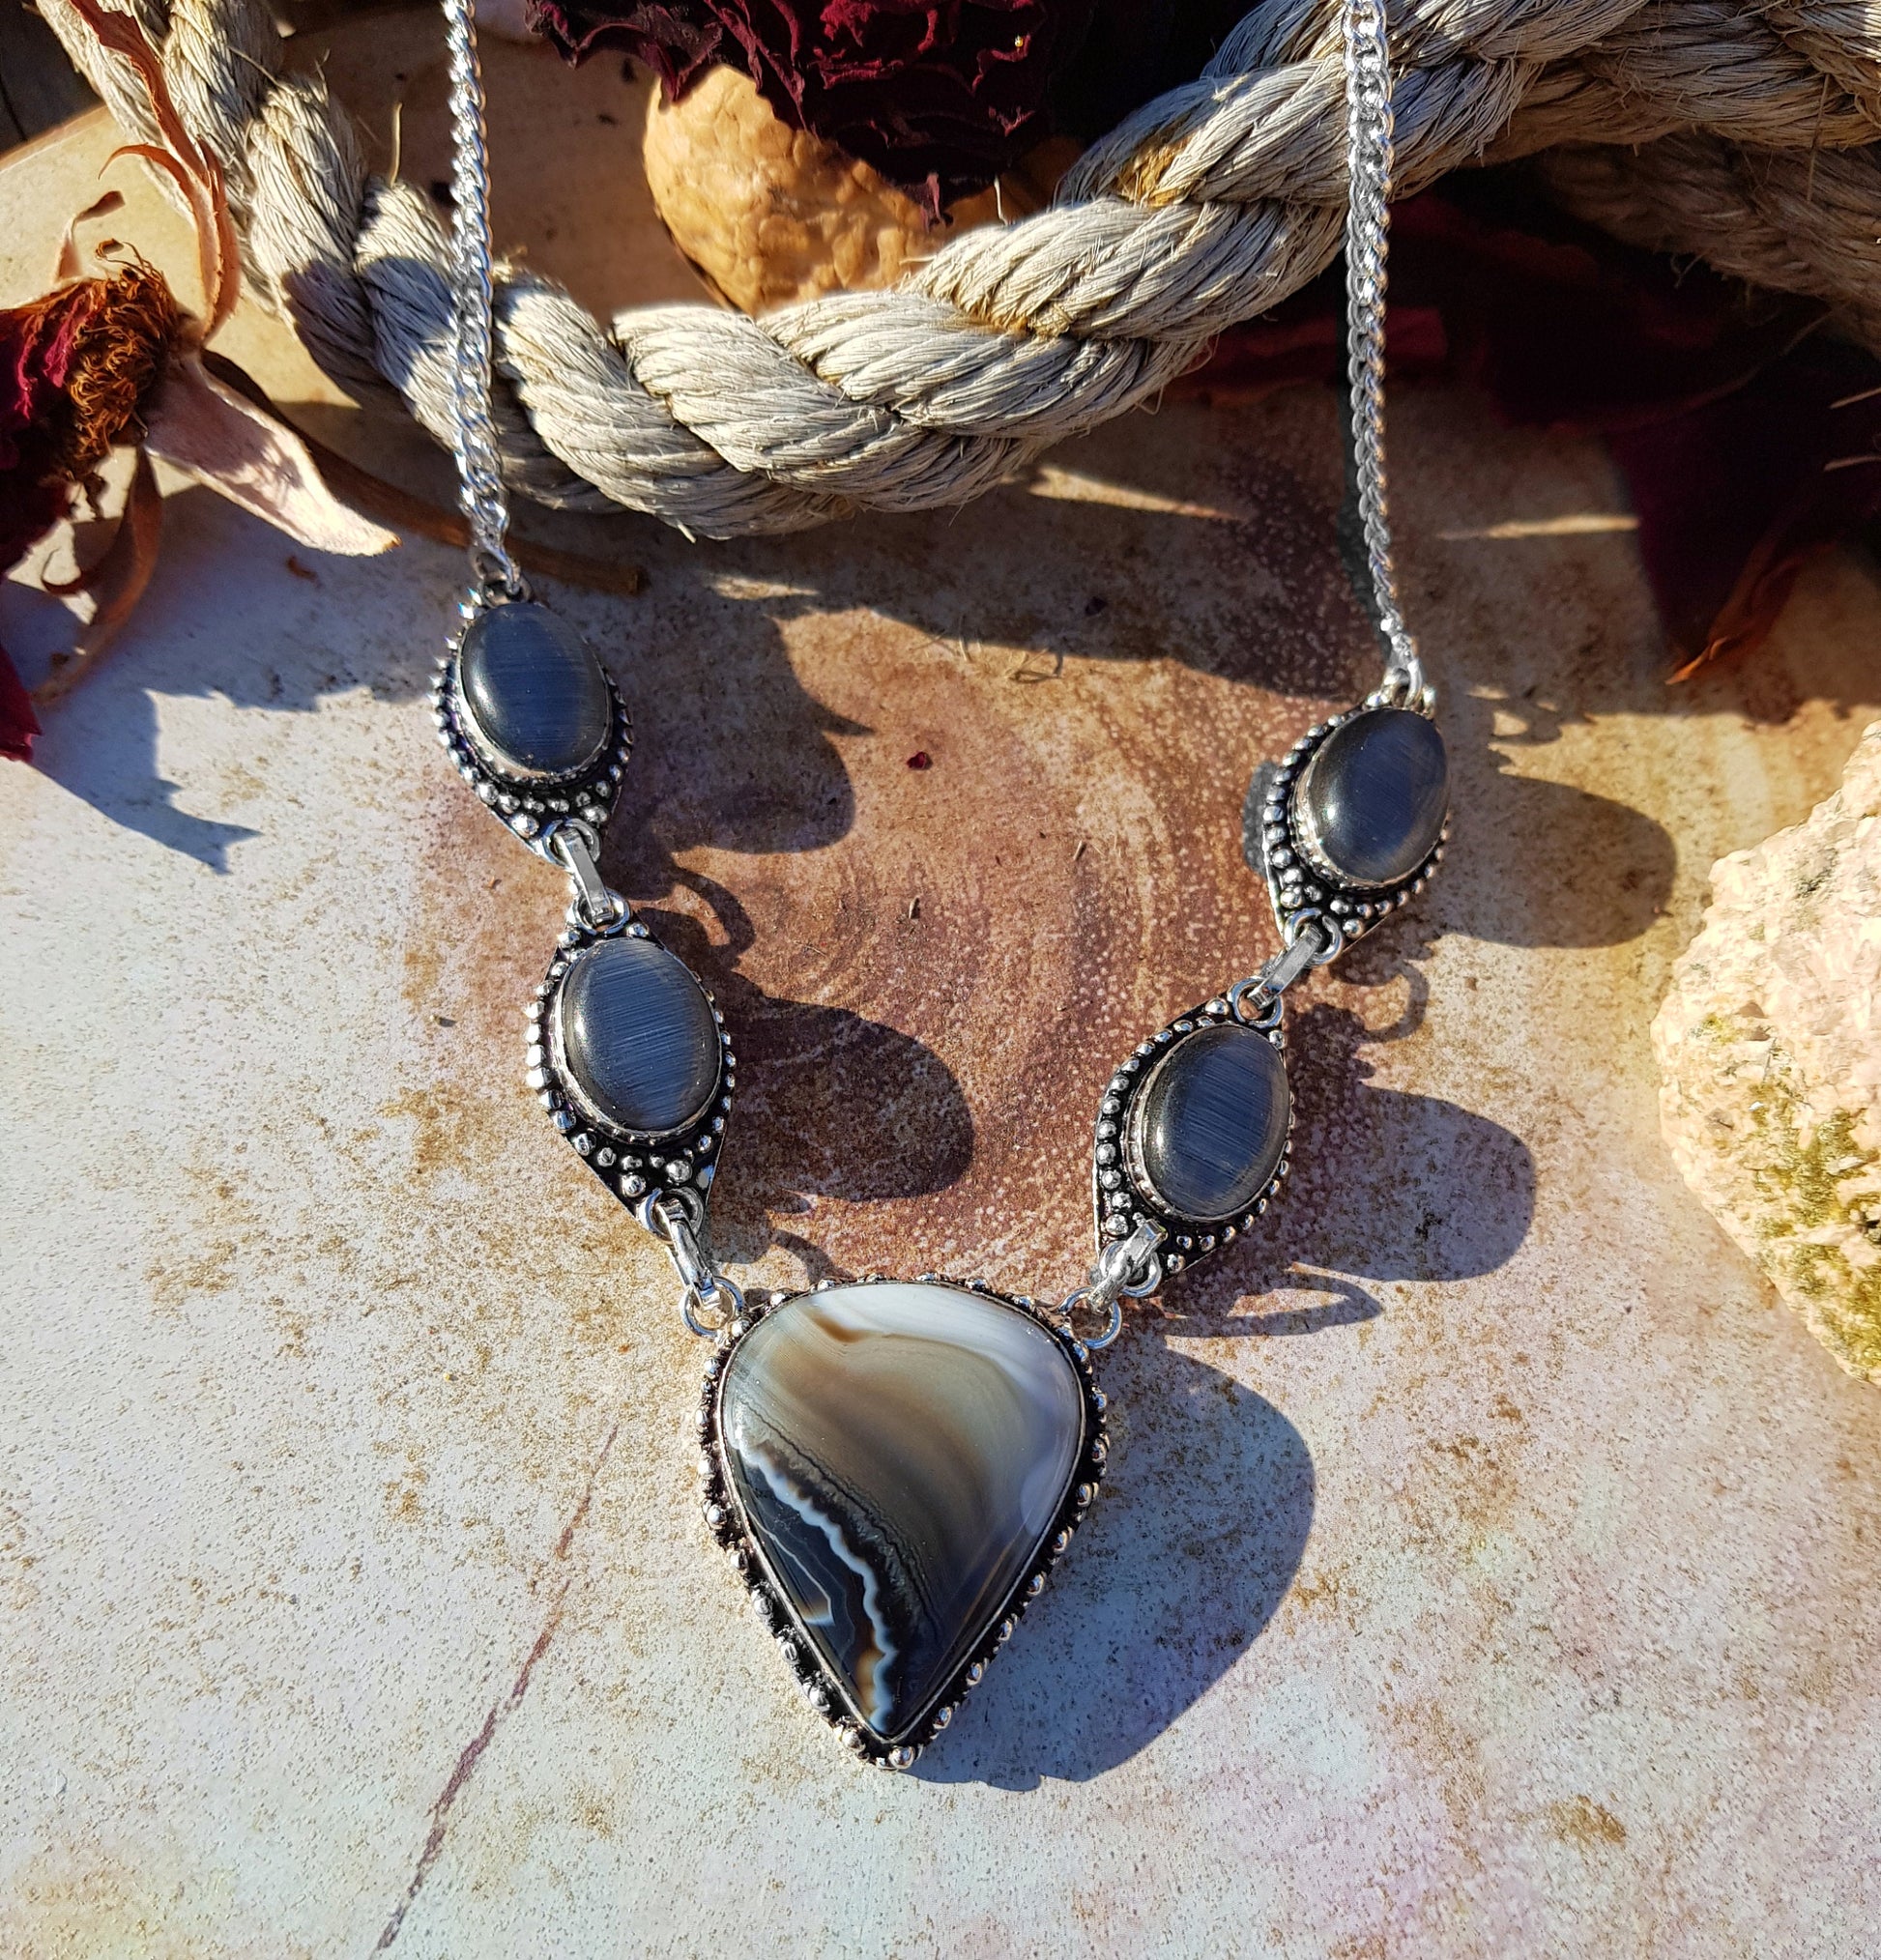 Botswana Agate And Hematite Statement Necklace In Sterling Silver, Multi Stone Necklace